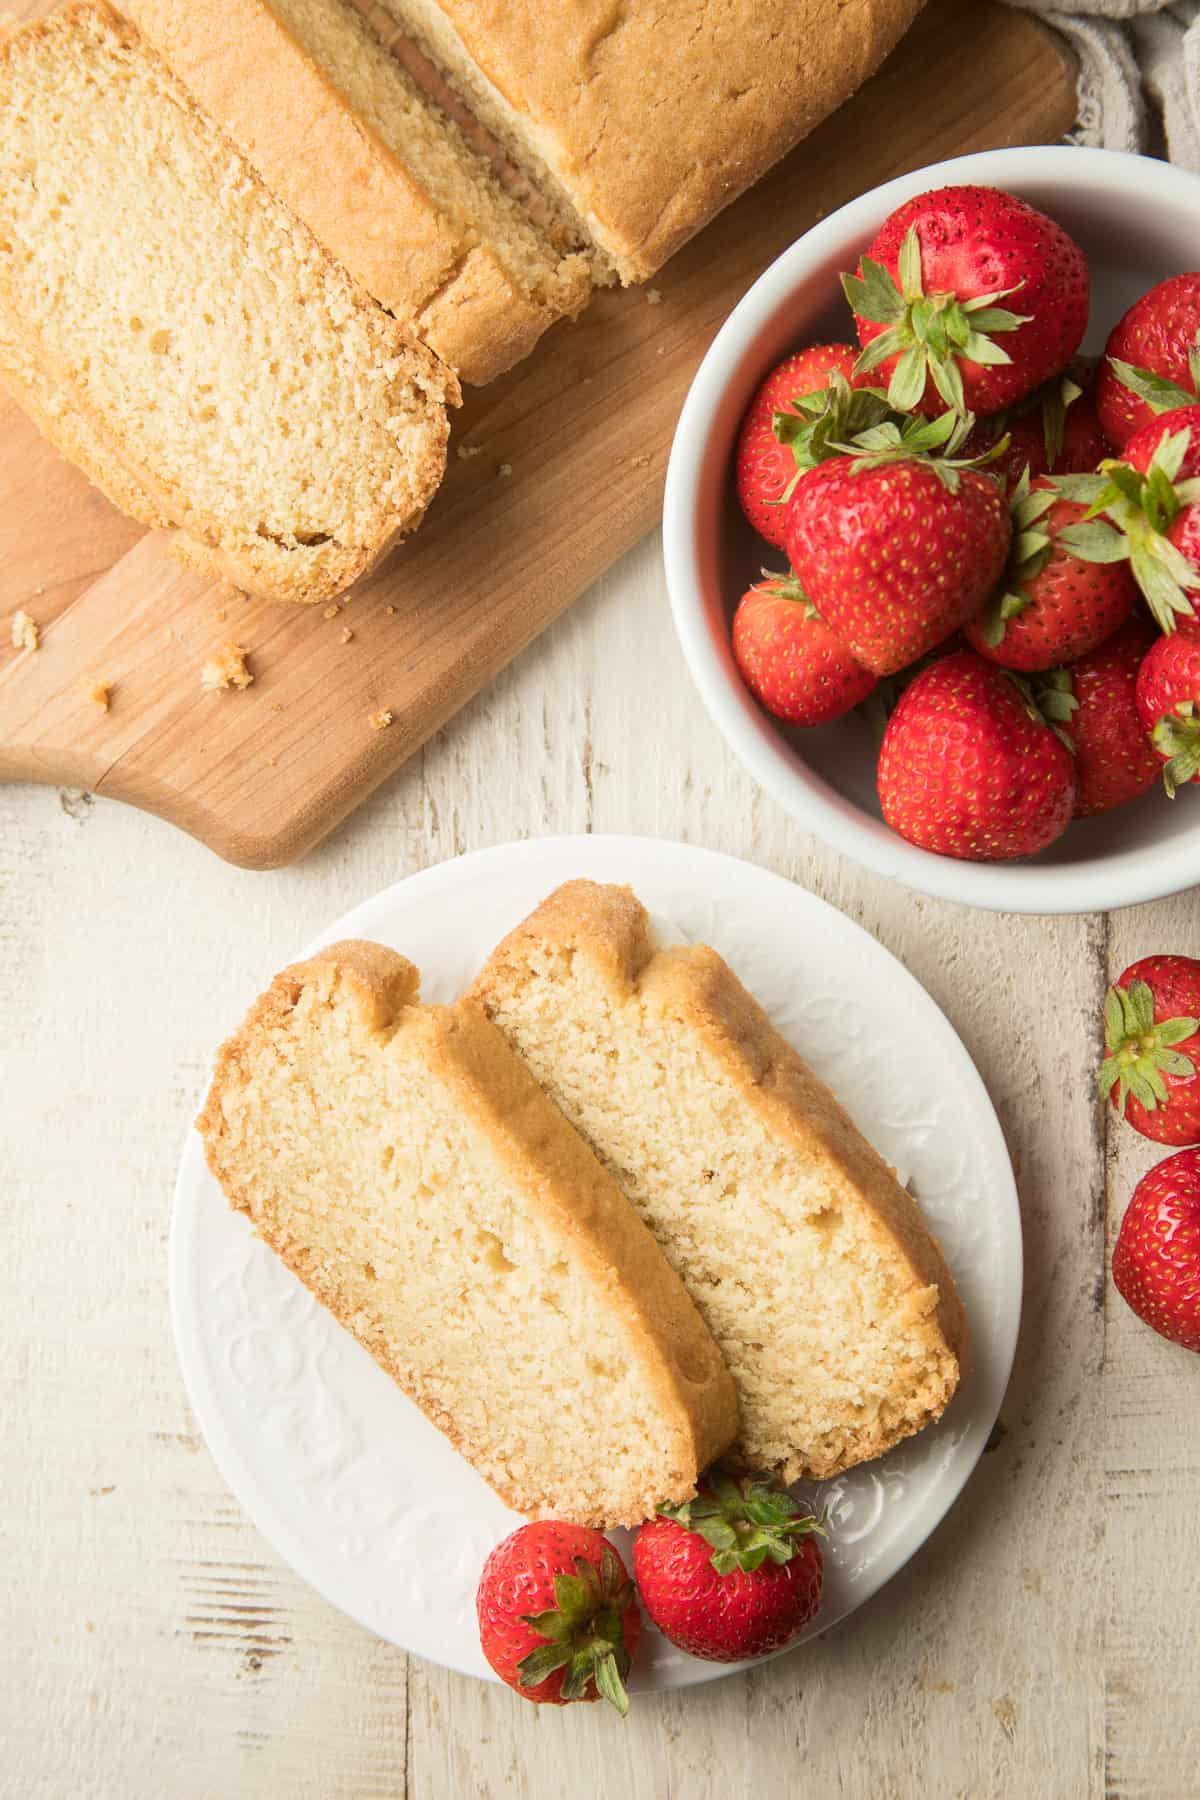 White wooden surface set with a bowl of strawberries, sliced vegan pound cake, and place of Vegan Pound Cake slices.